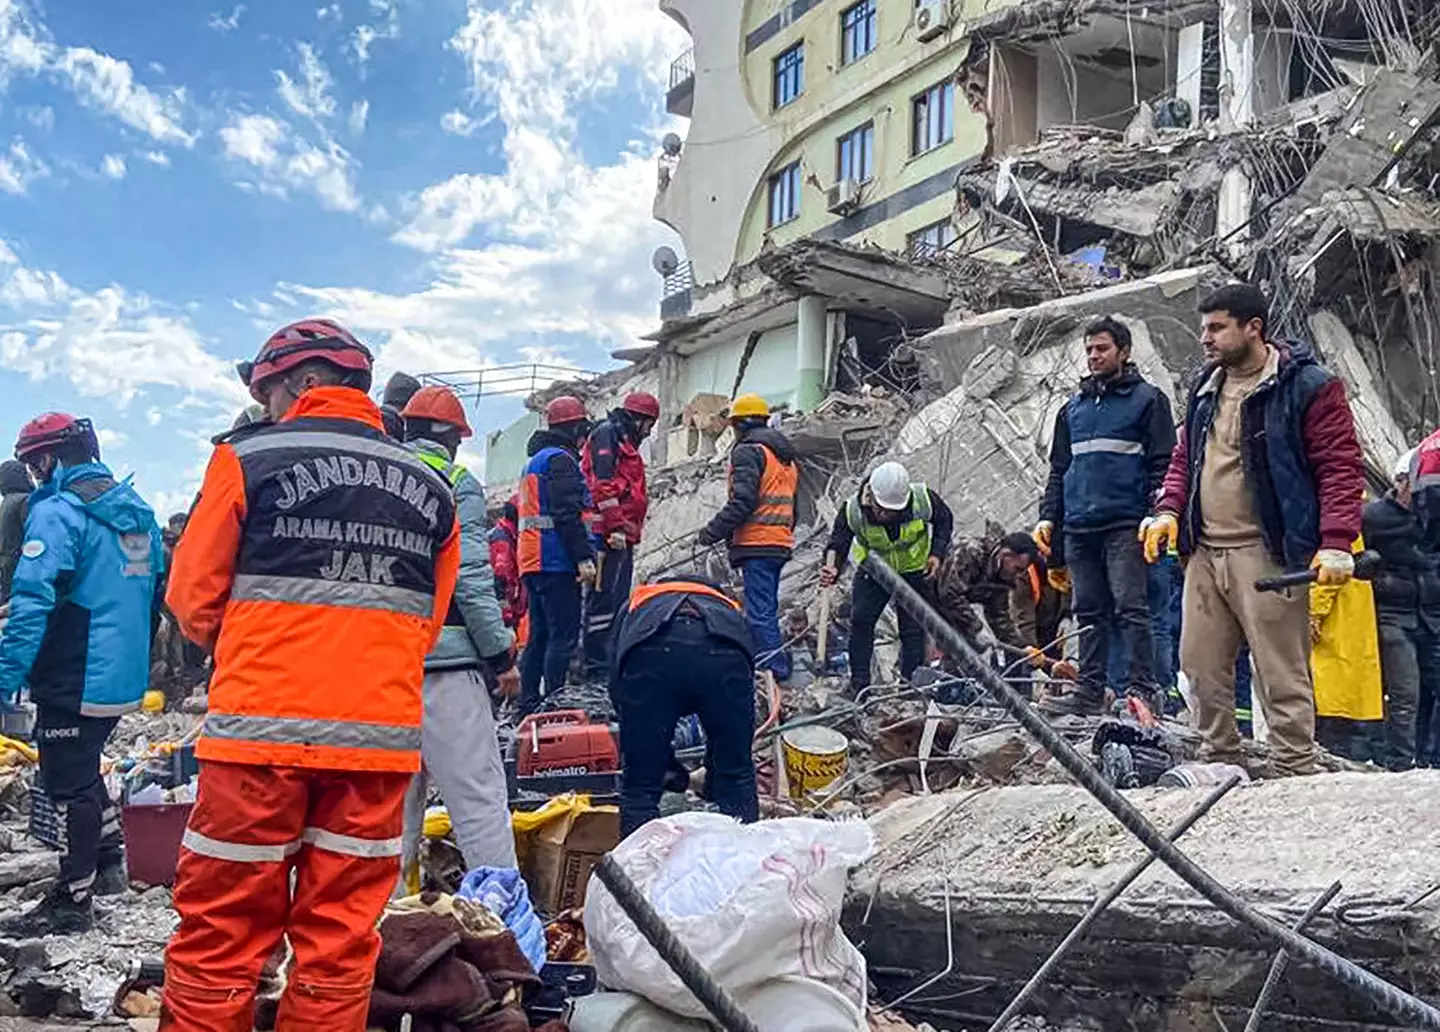 Rescue teams search for victims in the rubble on the second day following the earthquake.